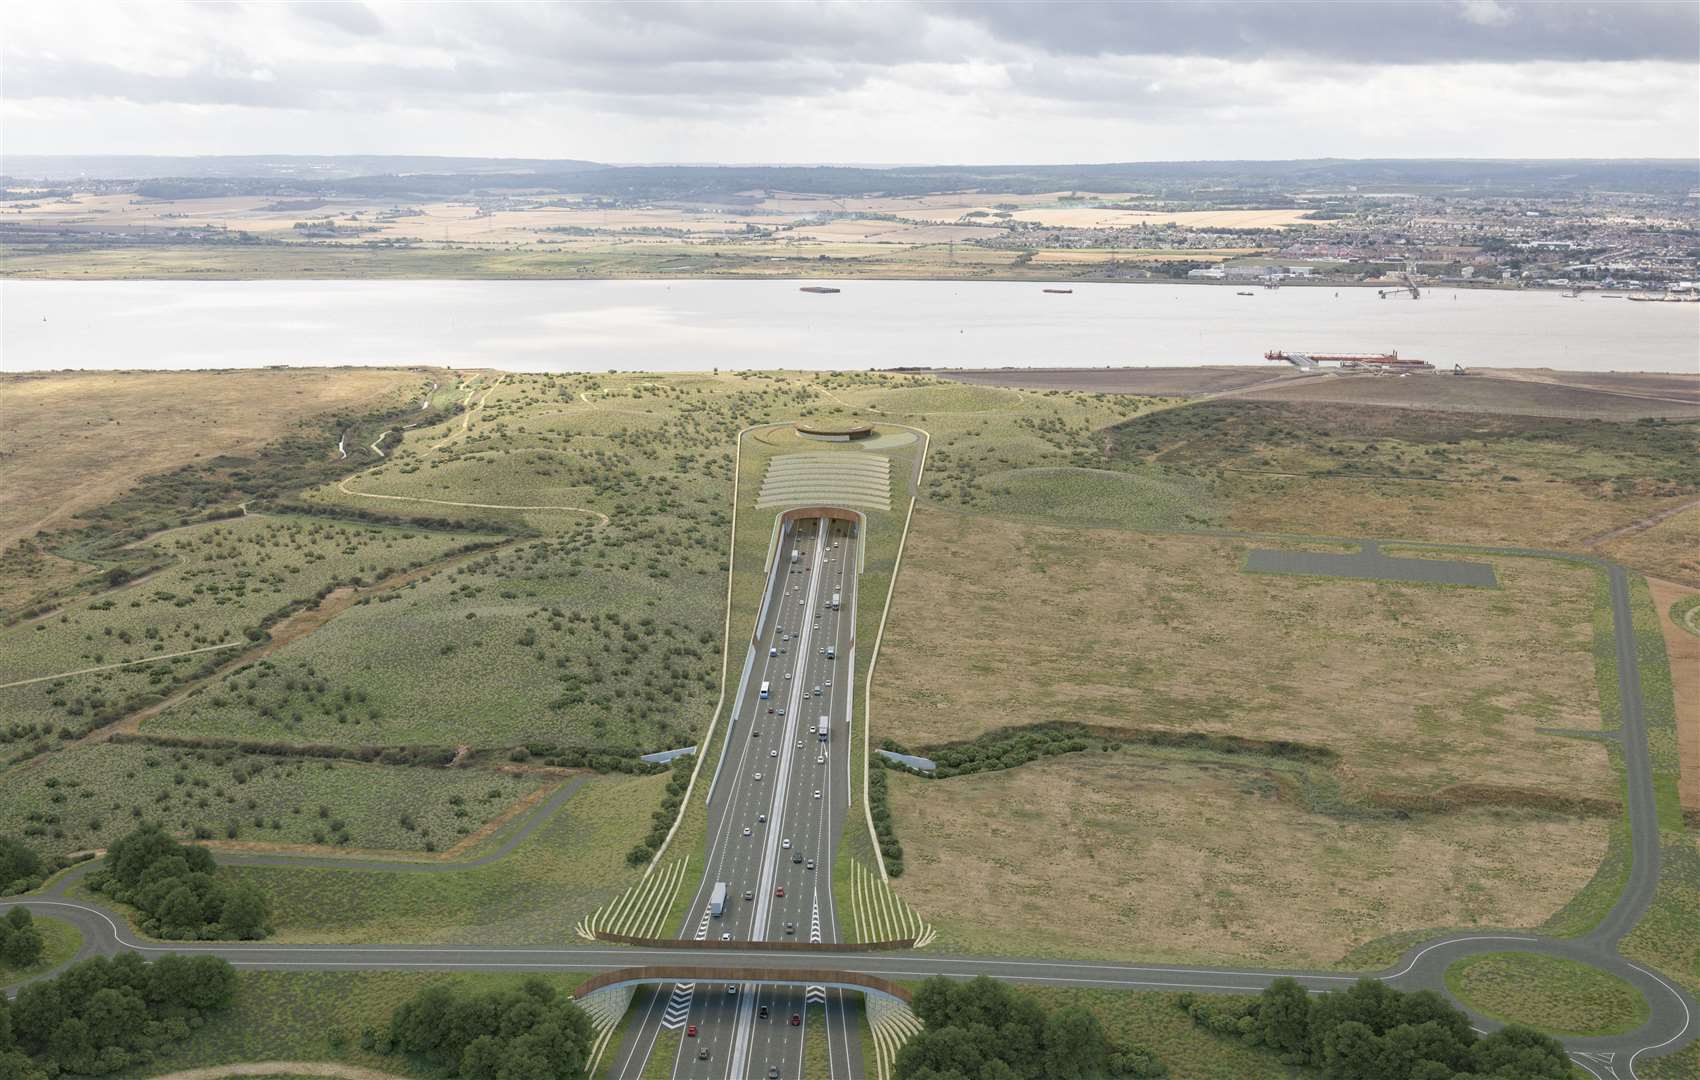 The Lower Thames Crossing would run between Kent and Essex. Picture: Joas Souza Photographer